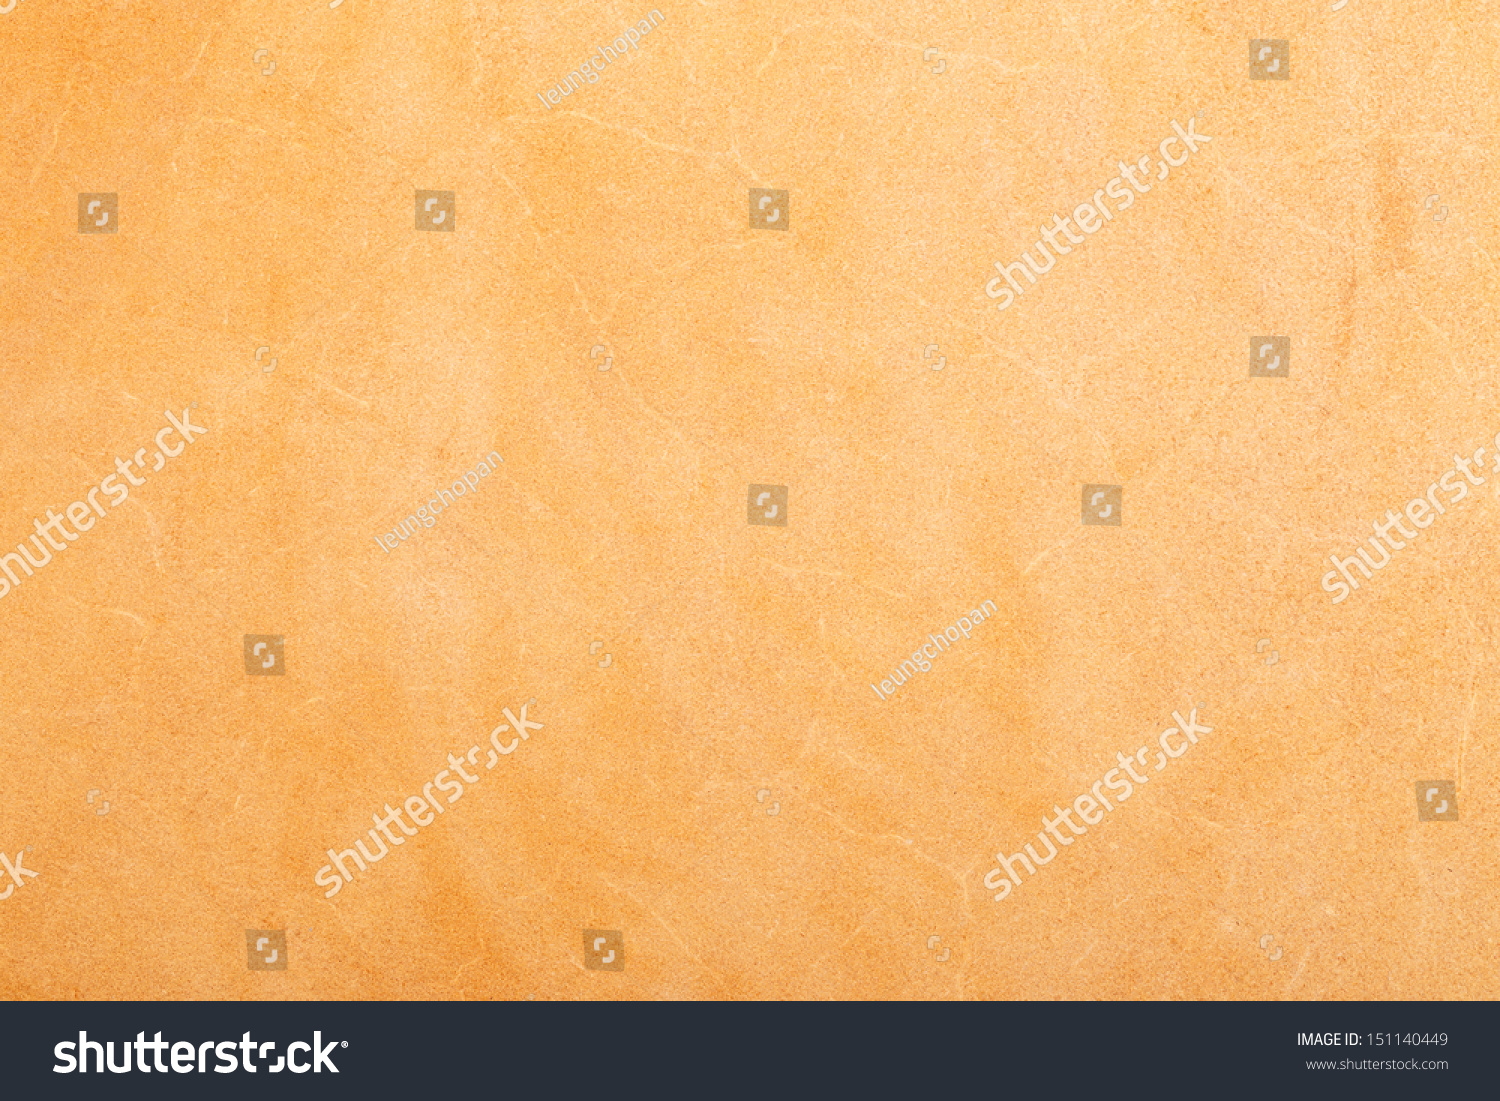 Vintage Leather Texture Nude Color Stock Photo 151140449 Shutterstock